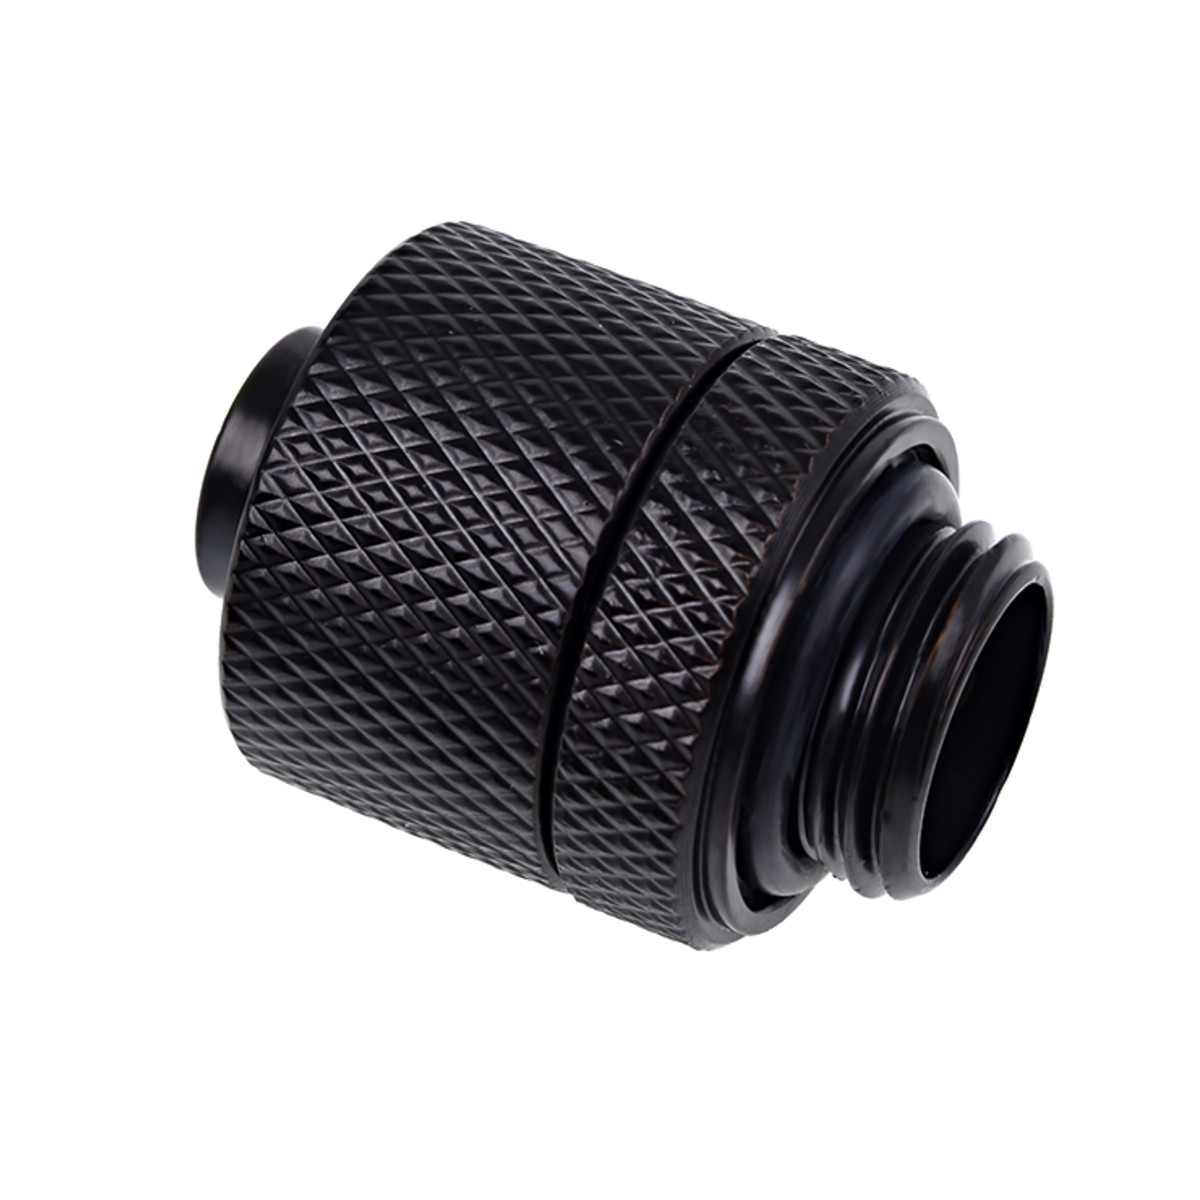 Alphacool - Alphacool Eiszapfen 13/10mm Deep Black Compression Fitting - Six Pack